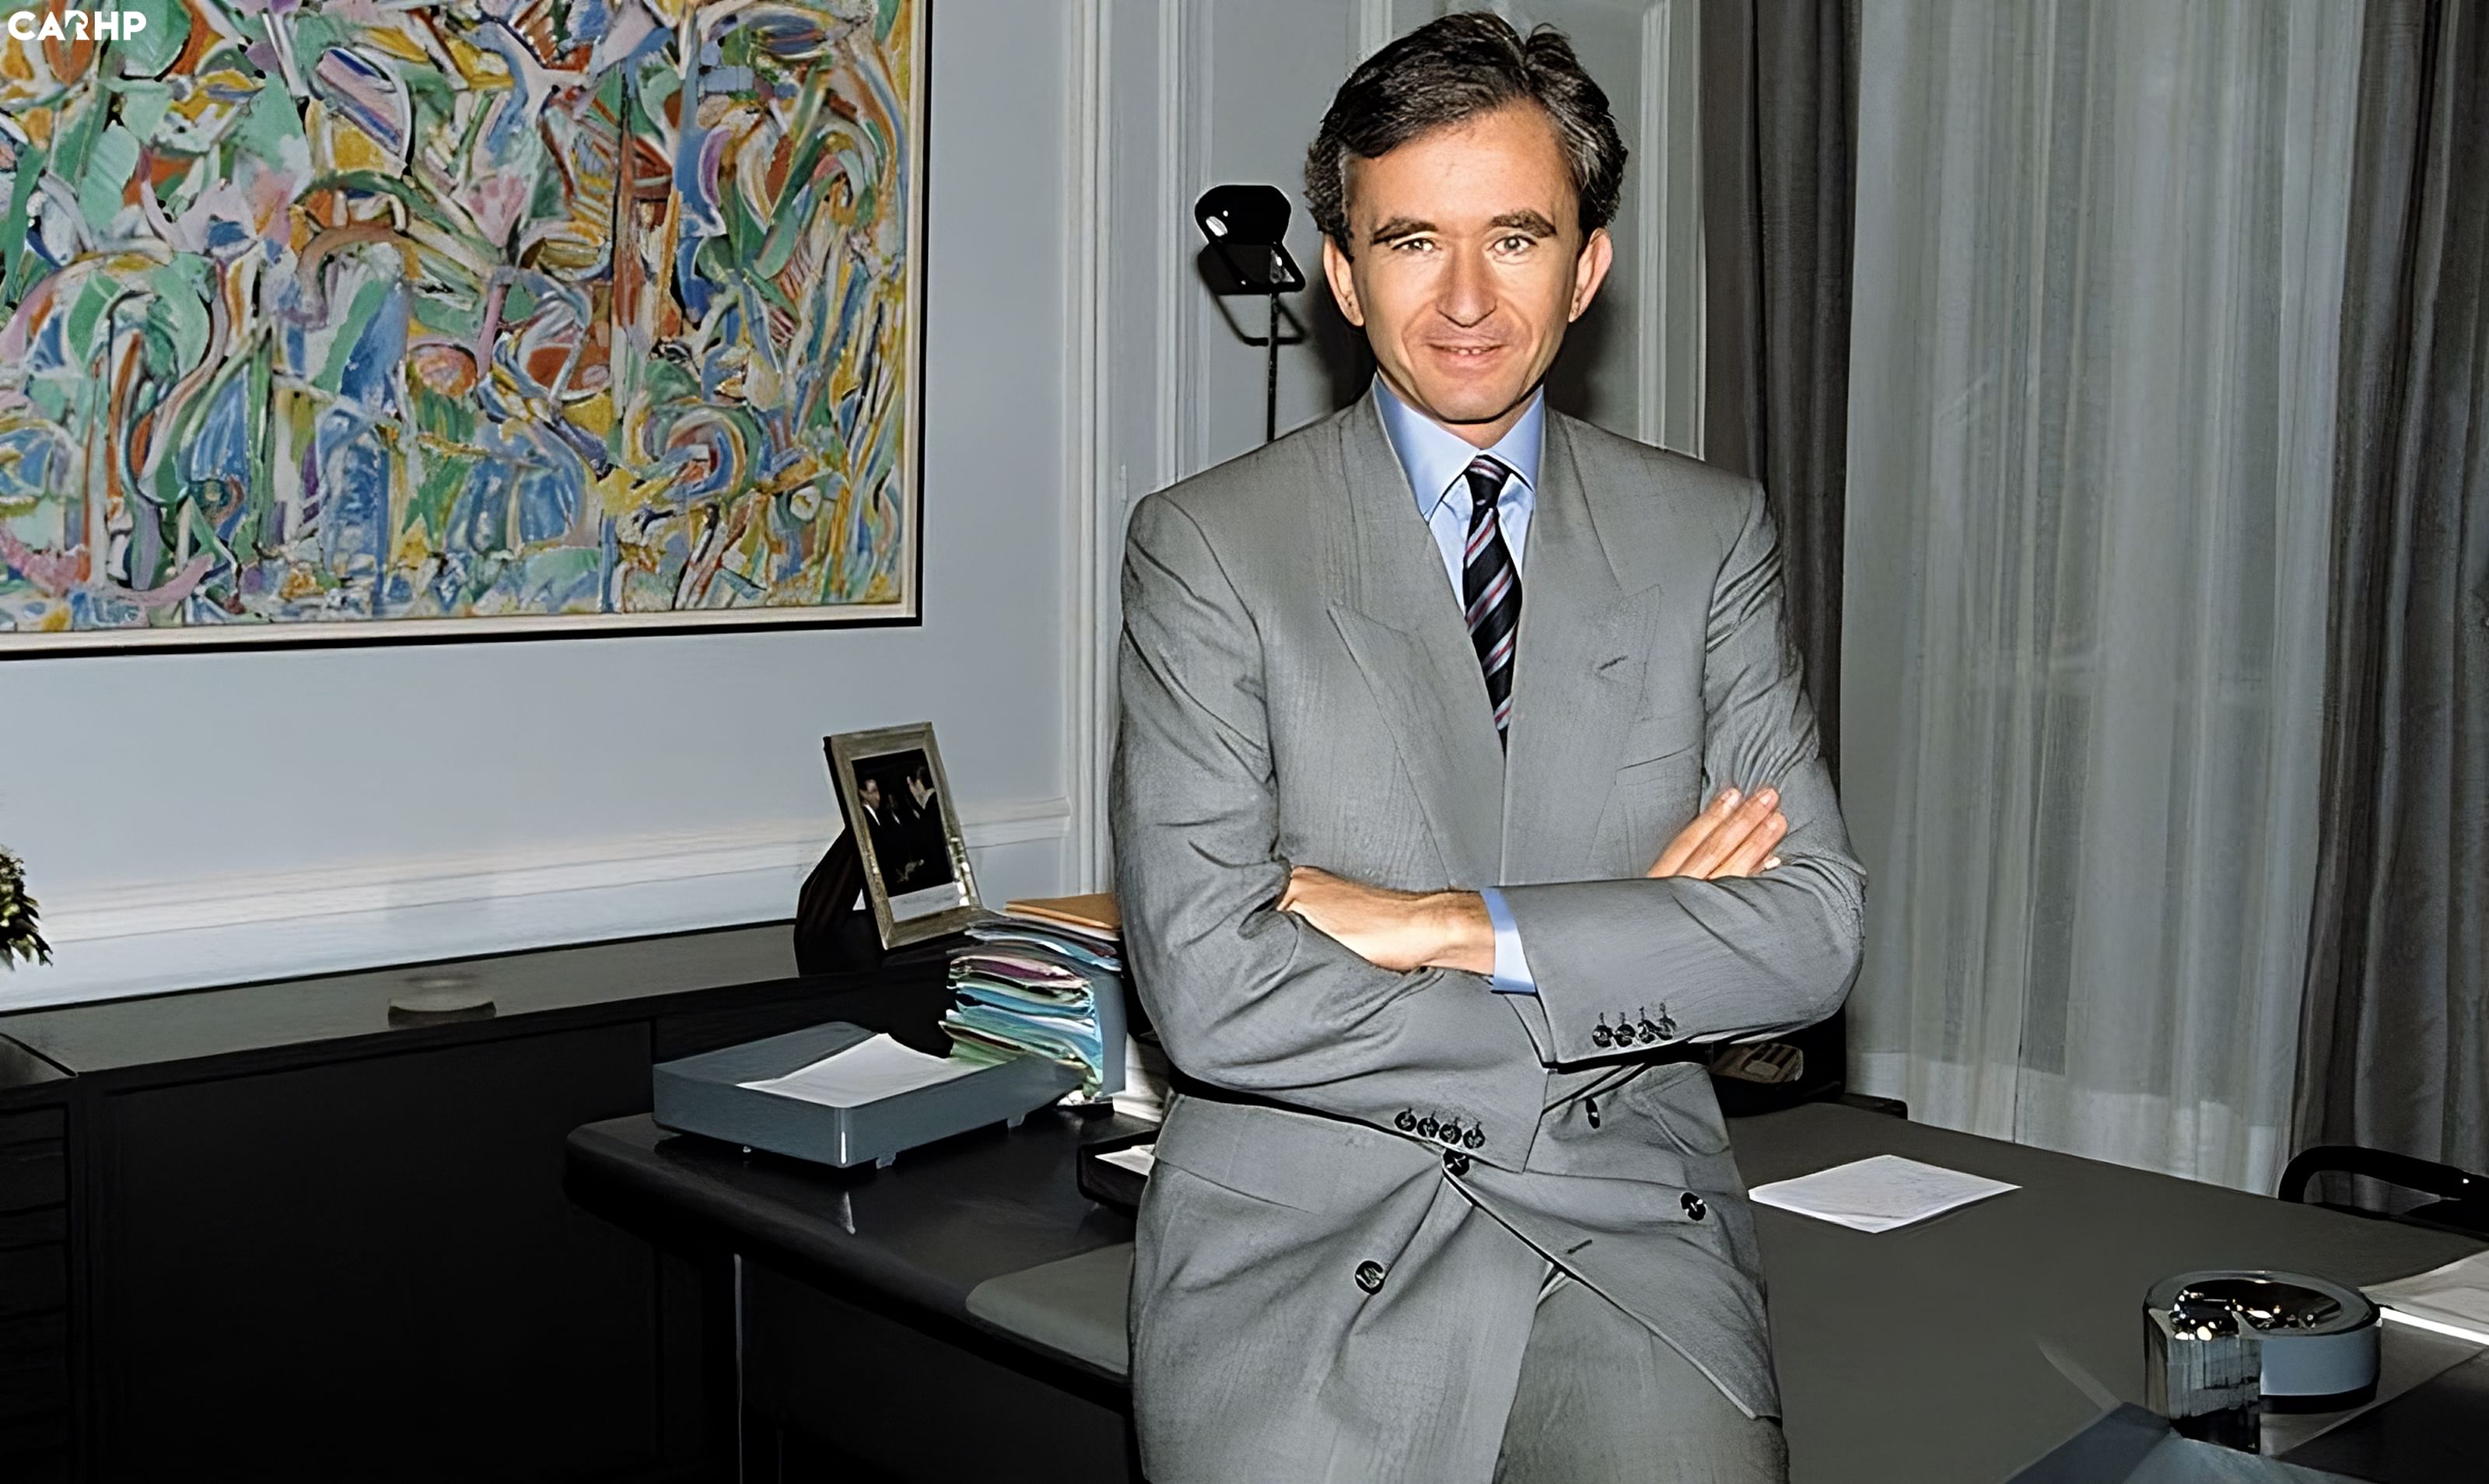 The Arnault family's net worth is estimated to be $238.5 billion as of  March 2023.